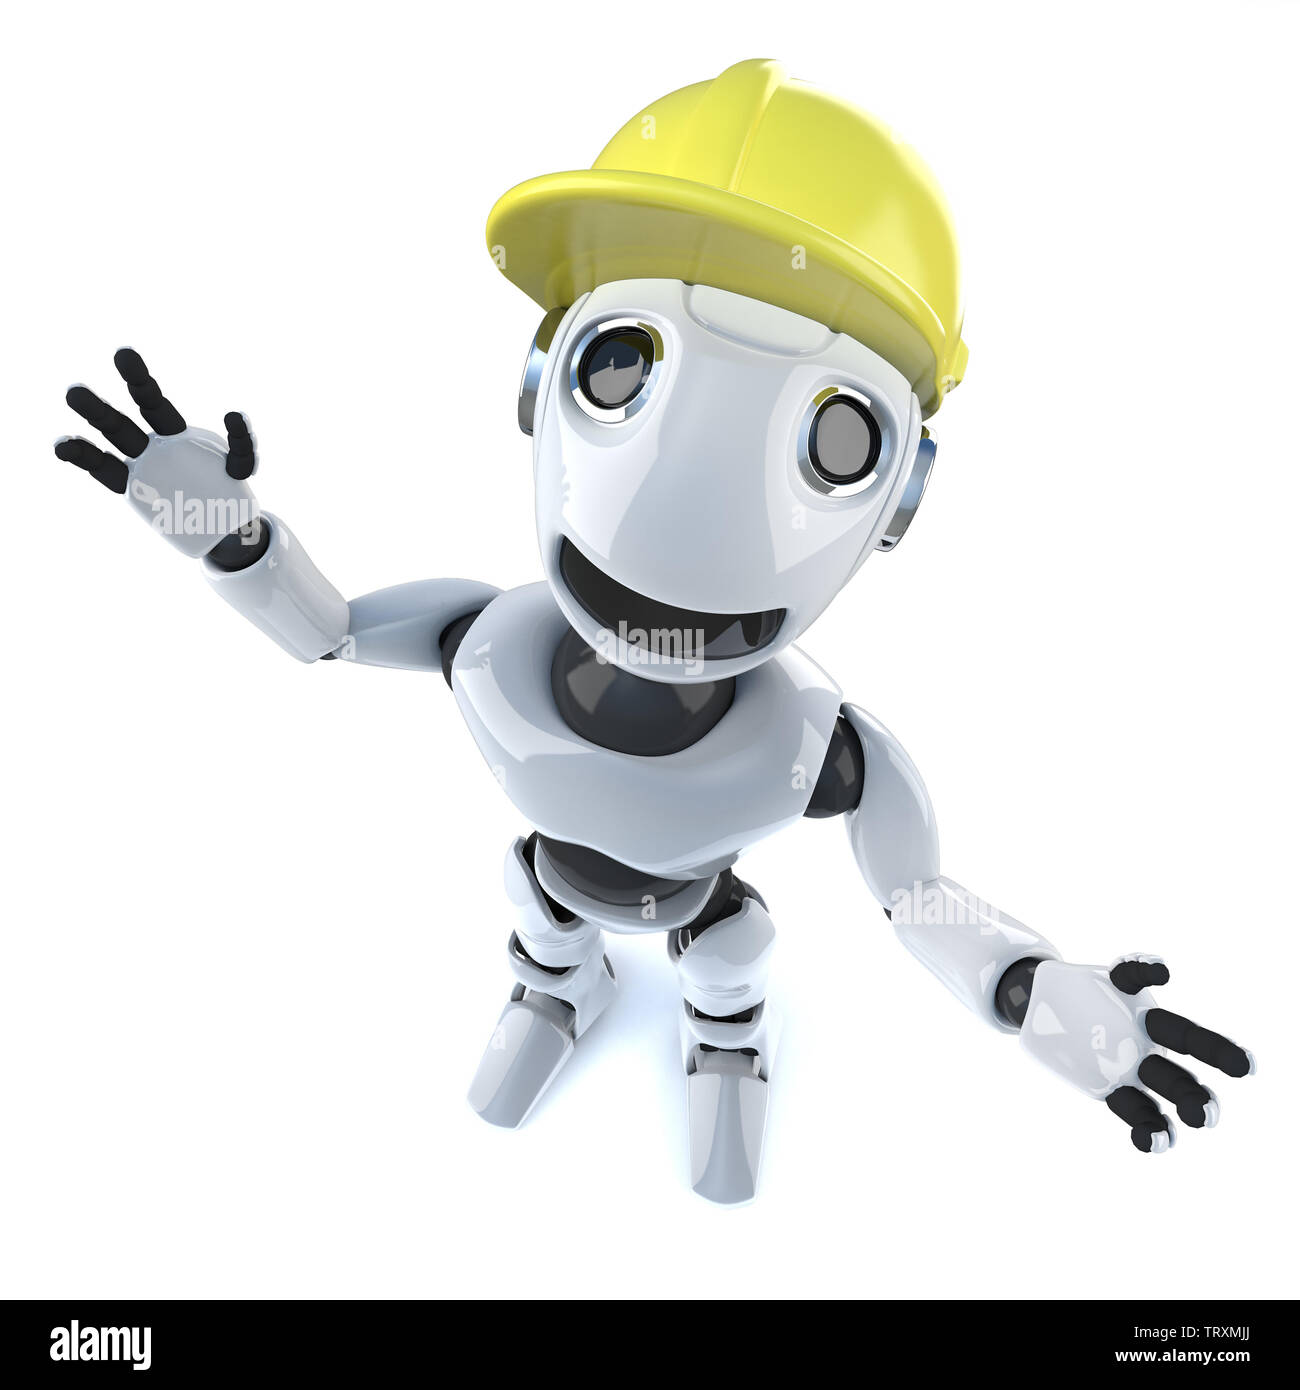 3d render of a funny cartoon mechanical robot characte wearing a builders hard hat Stock Photo